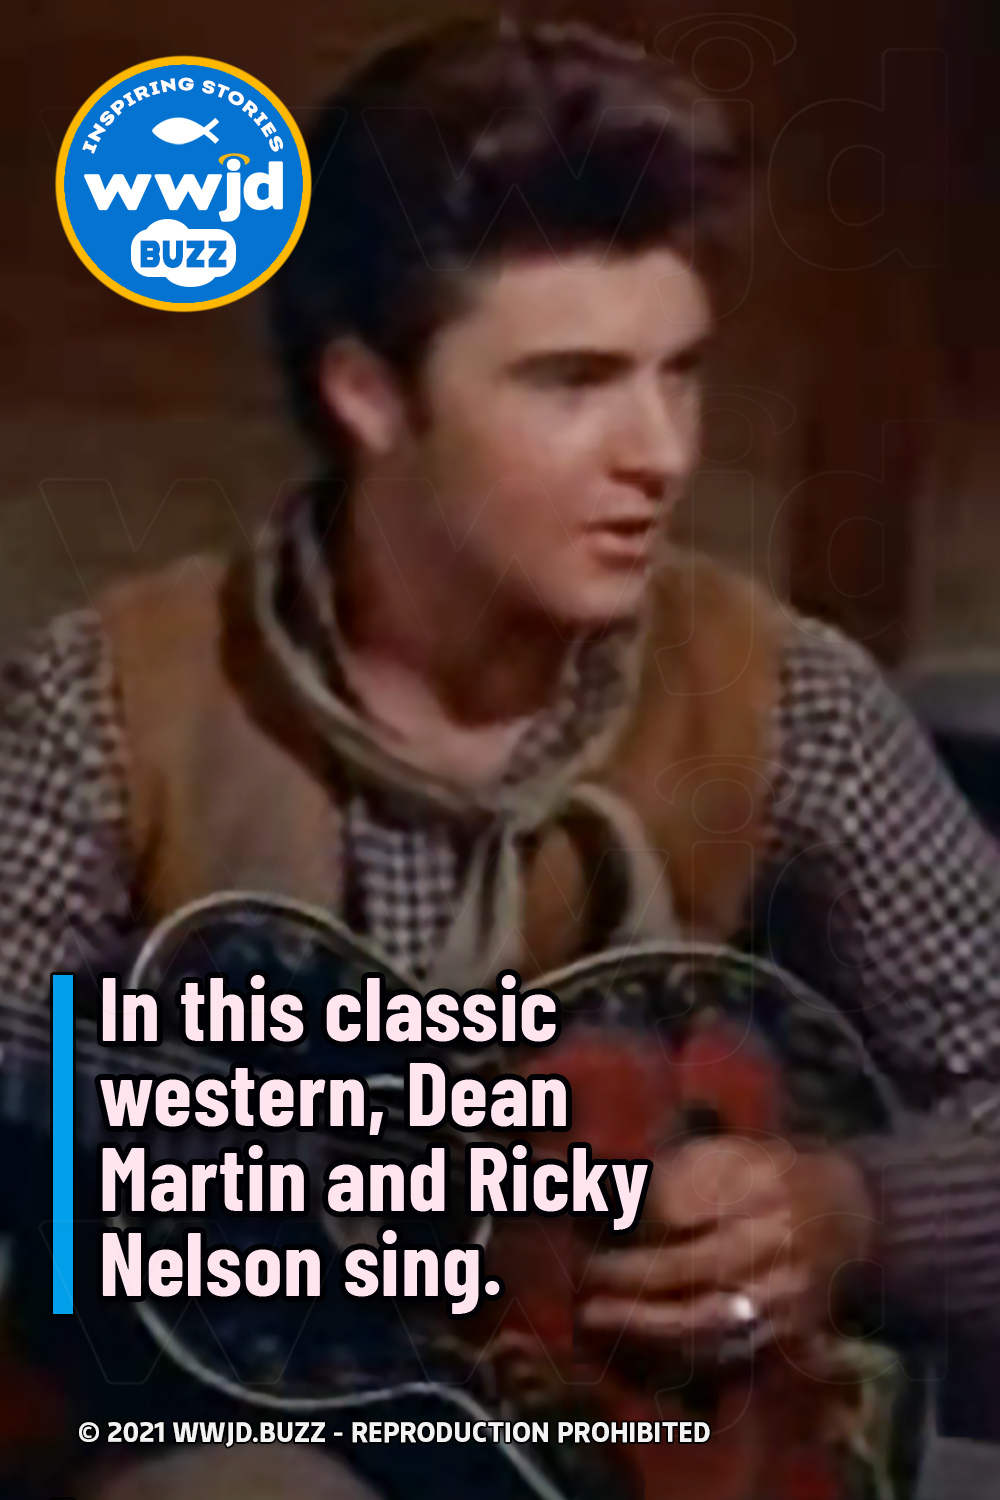 In this classic western, Dean Martin and Ricky Nelson sing. - WWJD